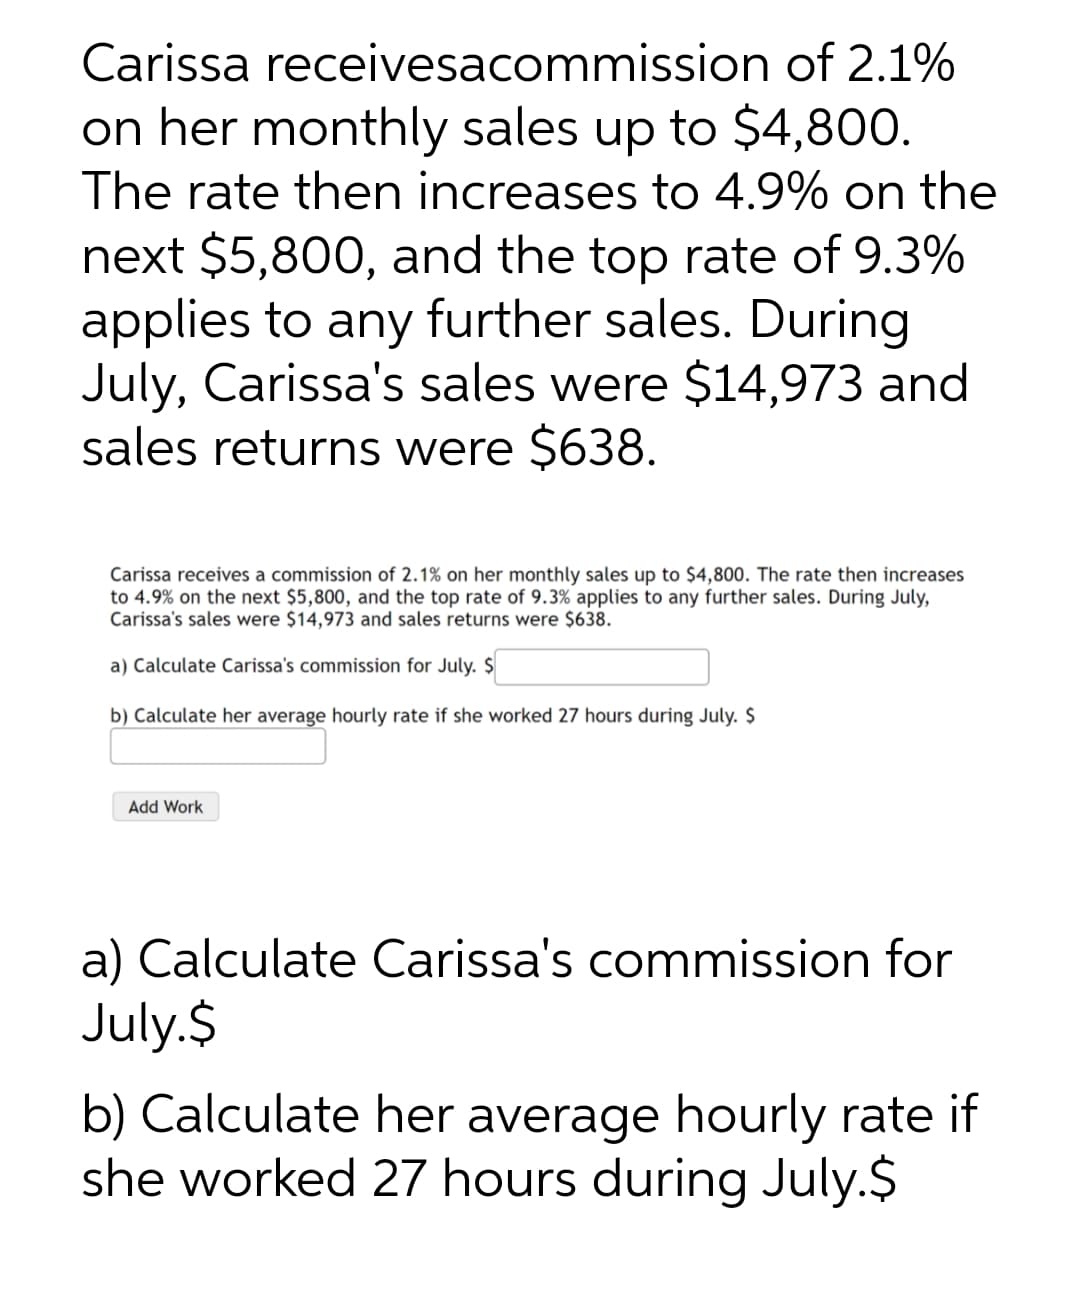 Carissa receivesacommission of 2.1%
on her monthly sales up to $4,800.
The rate then increases to 4.9% on the
next $5,800, and the top rate of 9.3%
applies to any further sales. During
July, Carissa's sales were $14,973 and
sales returns were $638.
Carissa receives a commission of 2.1% on her monthly sales up to $4,800. The rate then increases
to 4.9% on the next $5,800, and the top rate of 9.3% applies to any further sales. During July,
Carissa's sales were $14,973 and sales returns were $638.
a) Calculate Carissa's commission for July. $
b) Calculate her average hourly rate if she worked 27 hours during July. $
Add Work
a) Calculate Carissa's commission for
July.$
b) Calculate her average hourly rate if
she worked 27 hours during July.$
